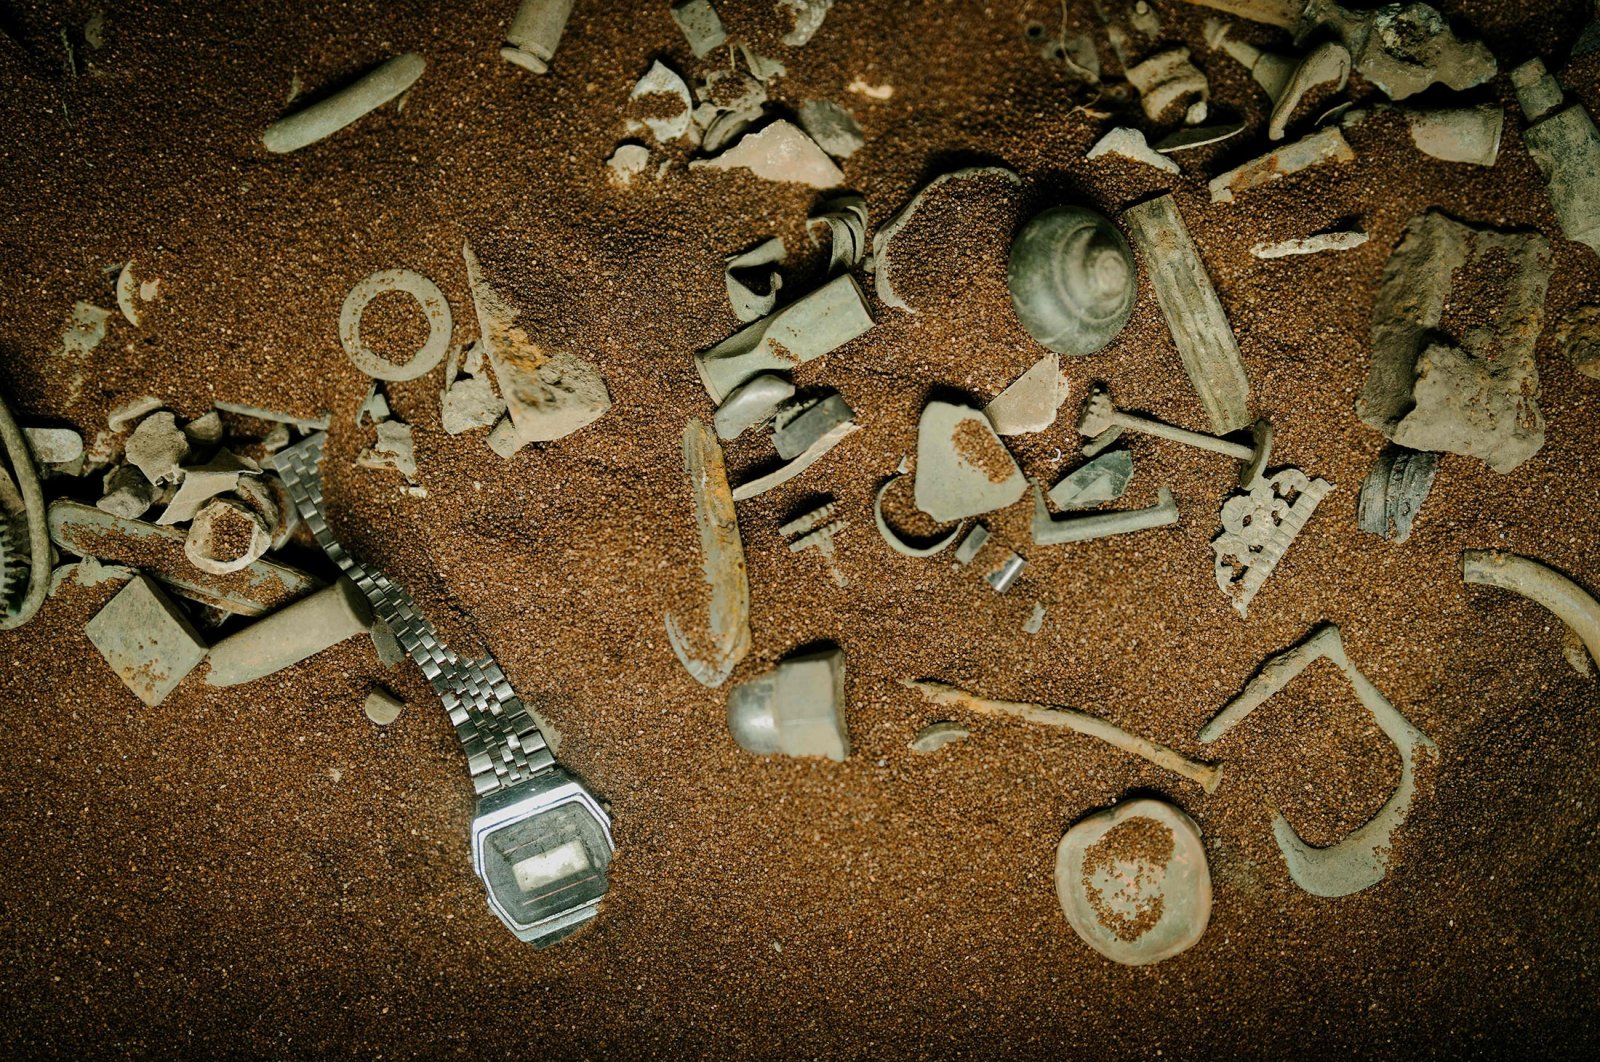 Items found by treasure hunters in the Danish national museum exhibition, in Copenhagen, Denmark, Feb. 4, 2023. (AFP Photo)